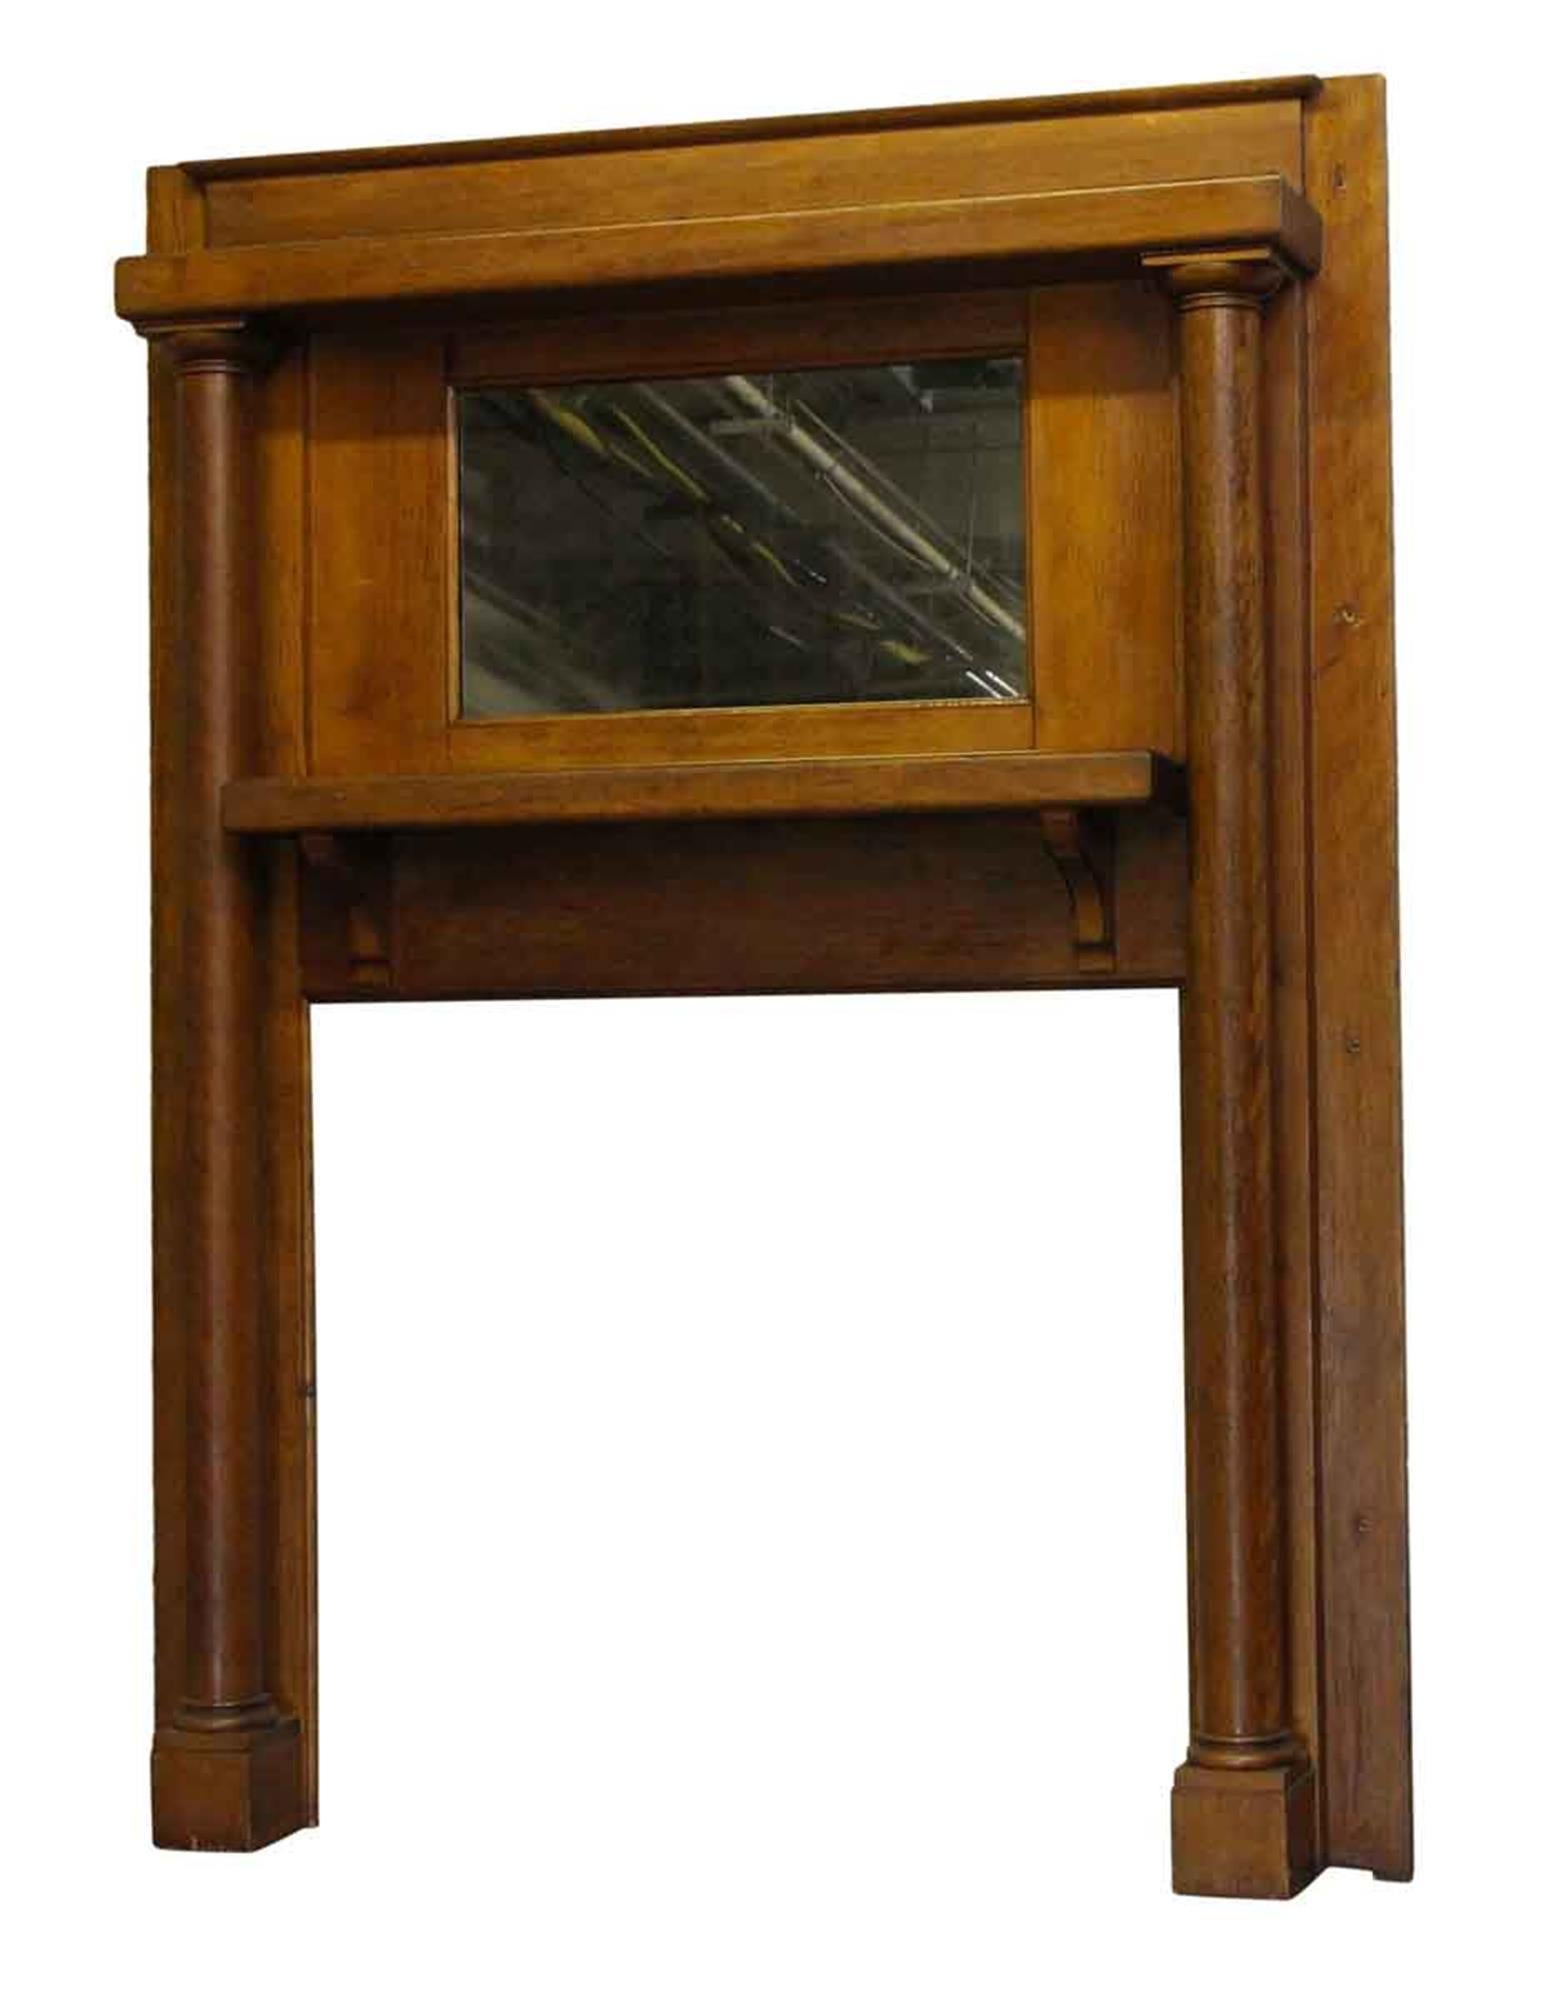 This is a simple turn of the 20th century birch wood mantel, done in a transitional style between Victorian and Arts & Crafts. This mantel is dated 1901 and has all original details handwritten on the back label. It has an antique mirror and full